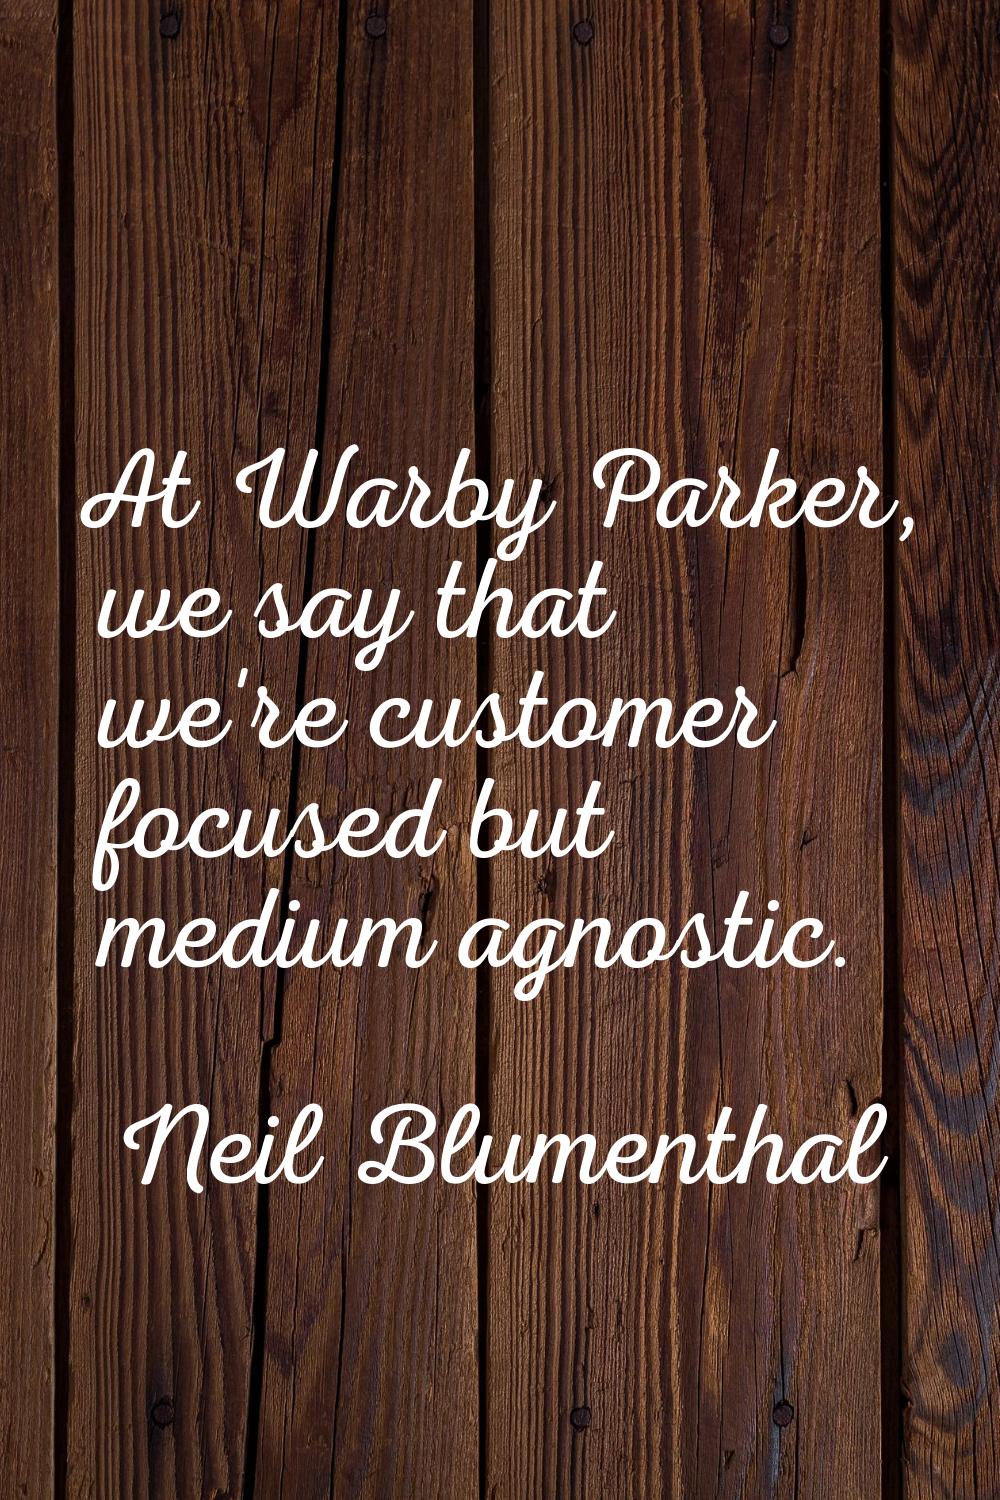 At Warby Parker, we say that we're customer focused but medium agnostic.